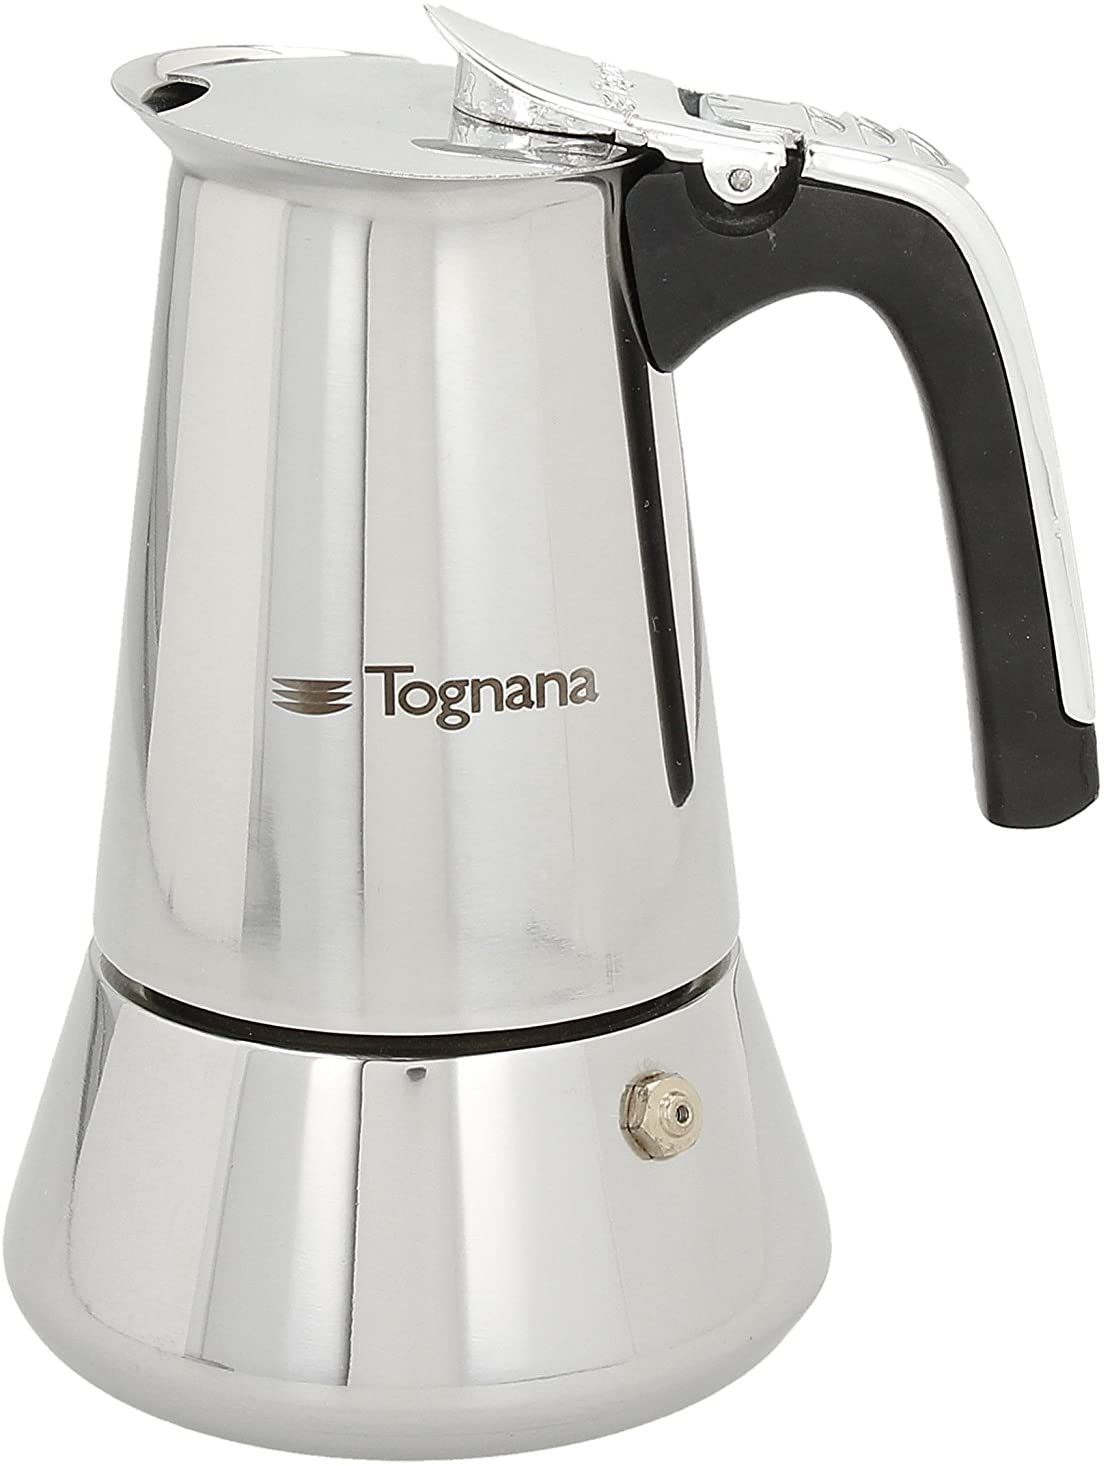 Tognana Riflex Induction Coffee Maker 2 Cups, Stainless Steel, Silver